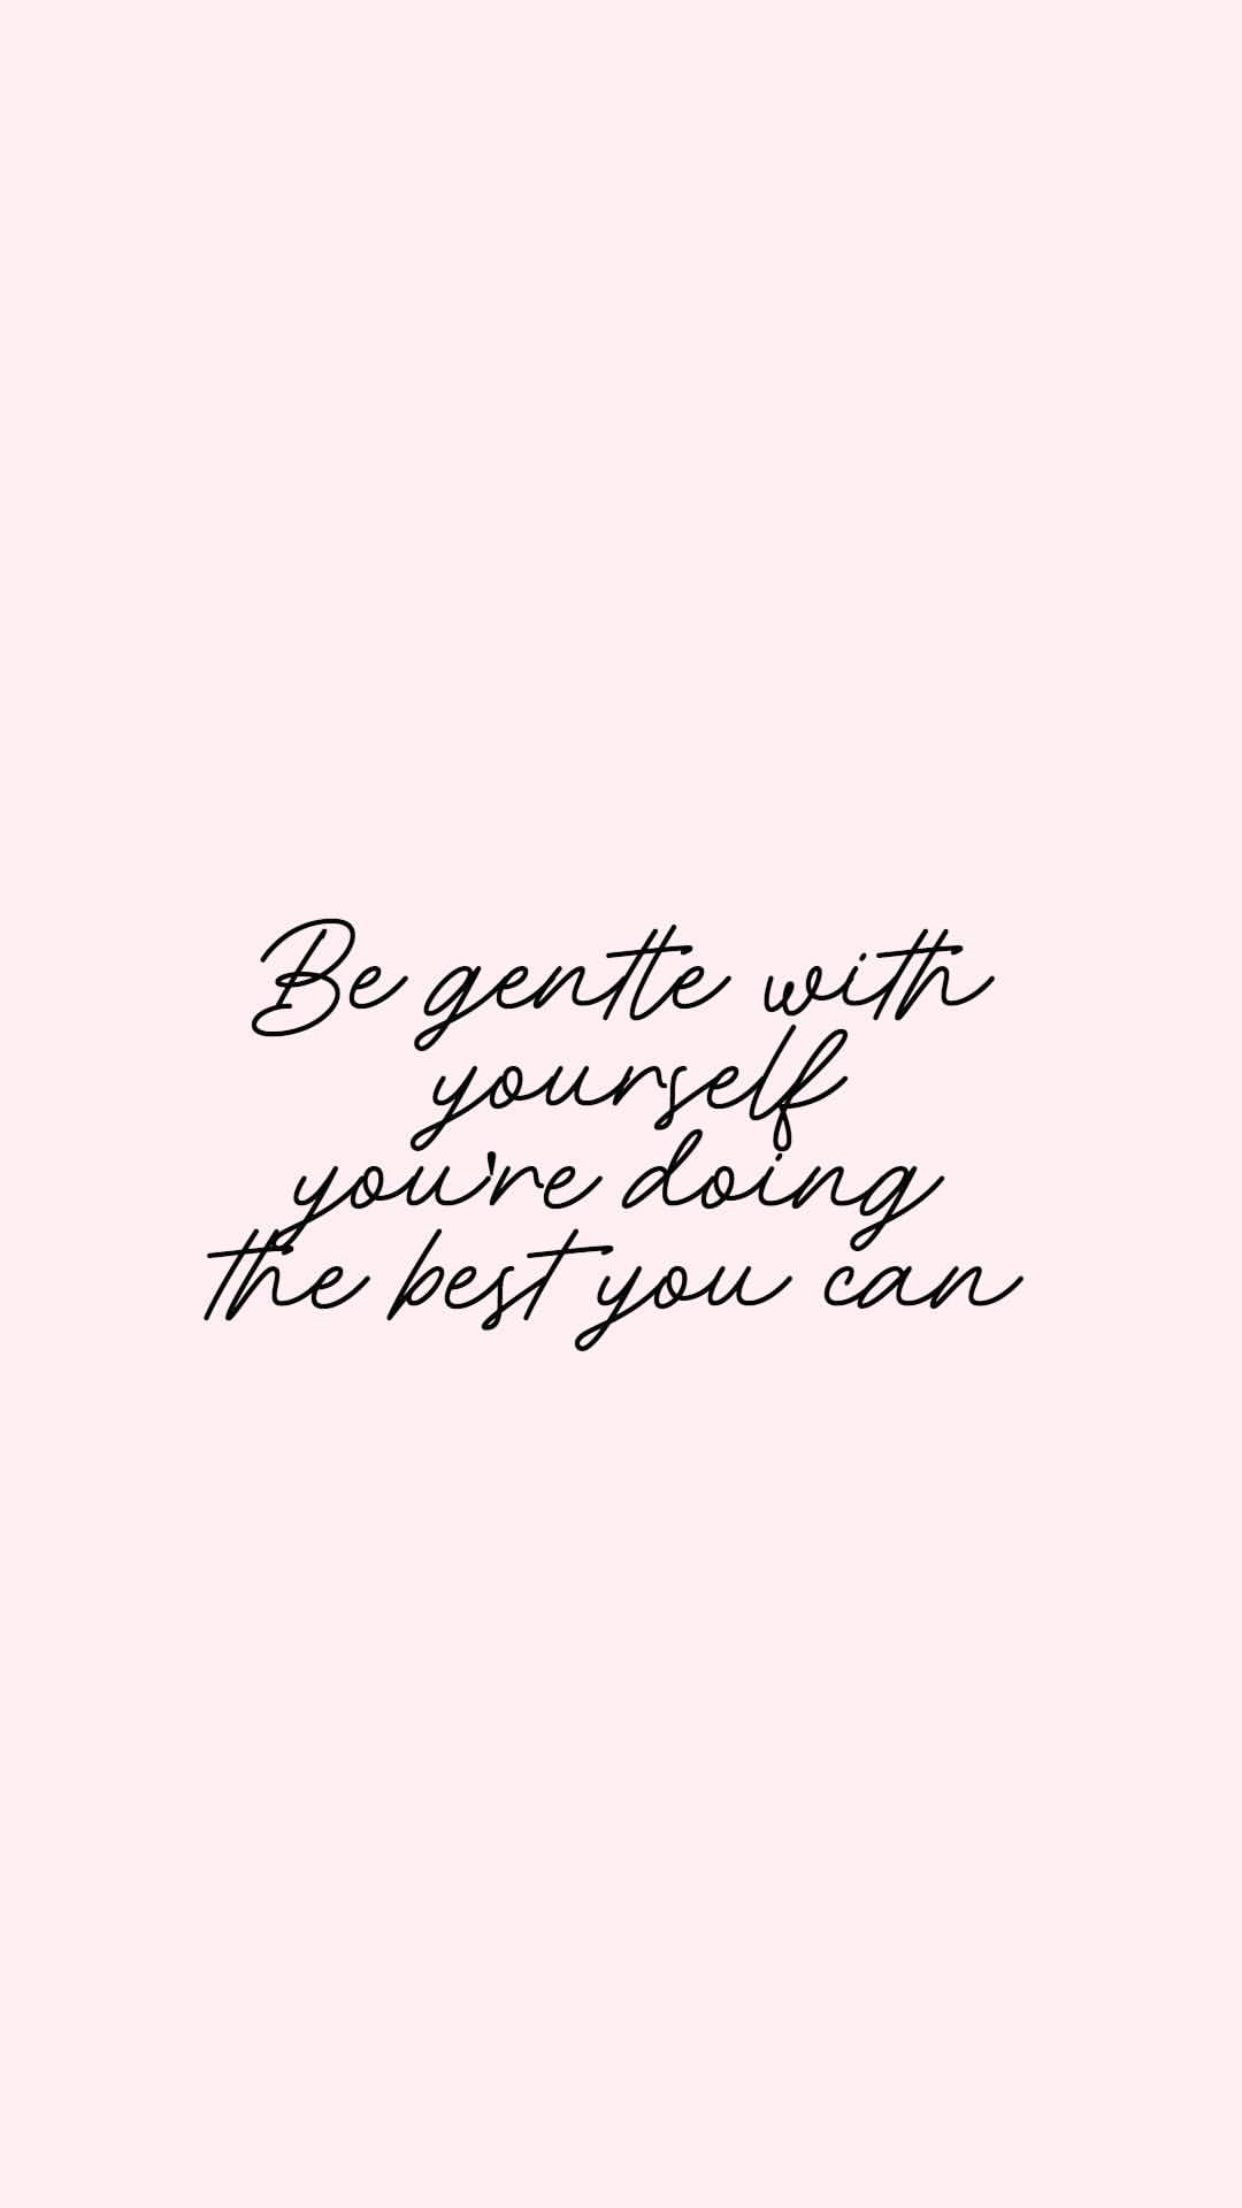 Motivation, quotes, self love ❤️ #motivationalquoteswallpaper. Inspirational words, Positive quotes, Quotes